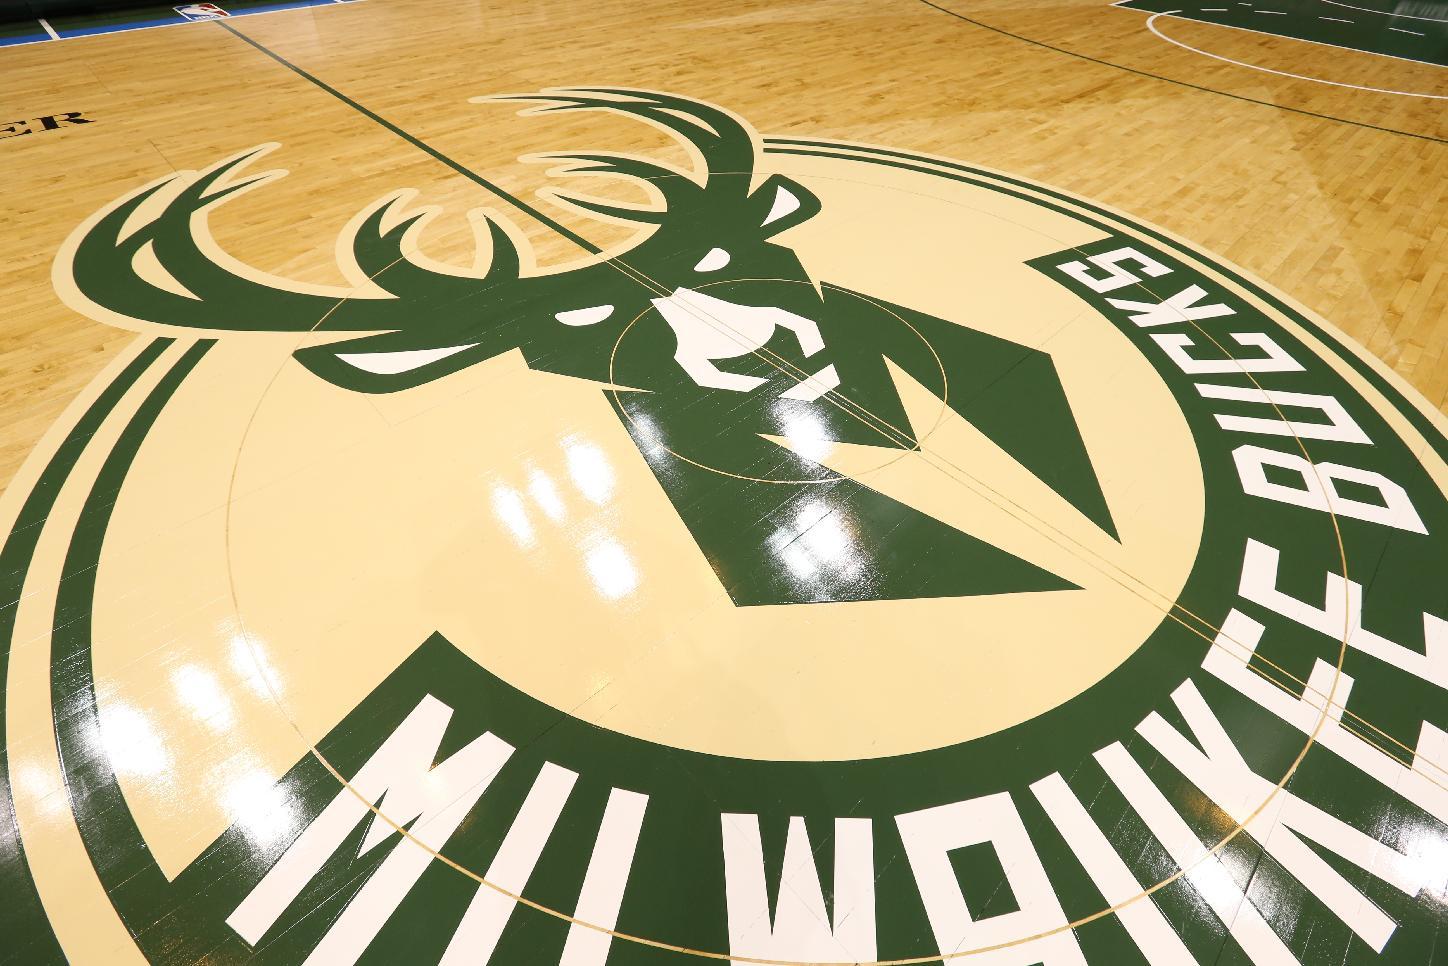 It looks like the Bucks' new logo will continue to occupy courts in Milwaukee for some time. (Gary Dineen/NBAE/Getty Images)